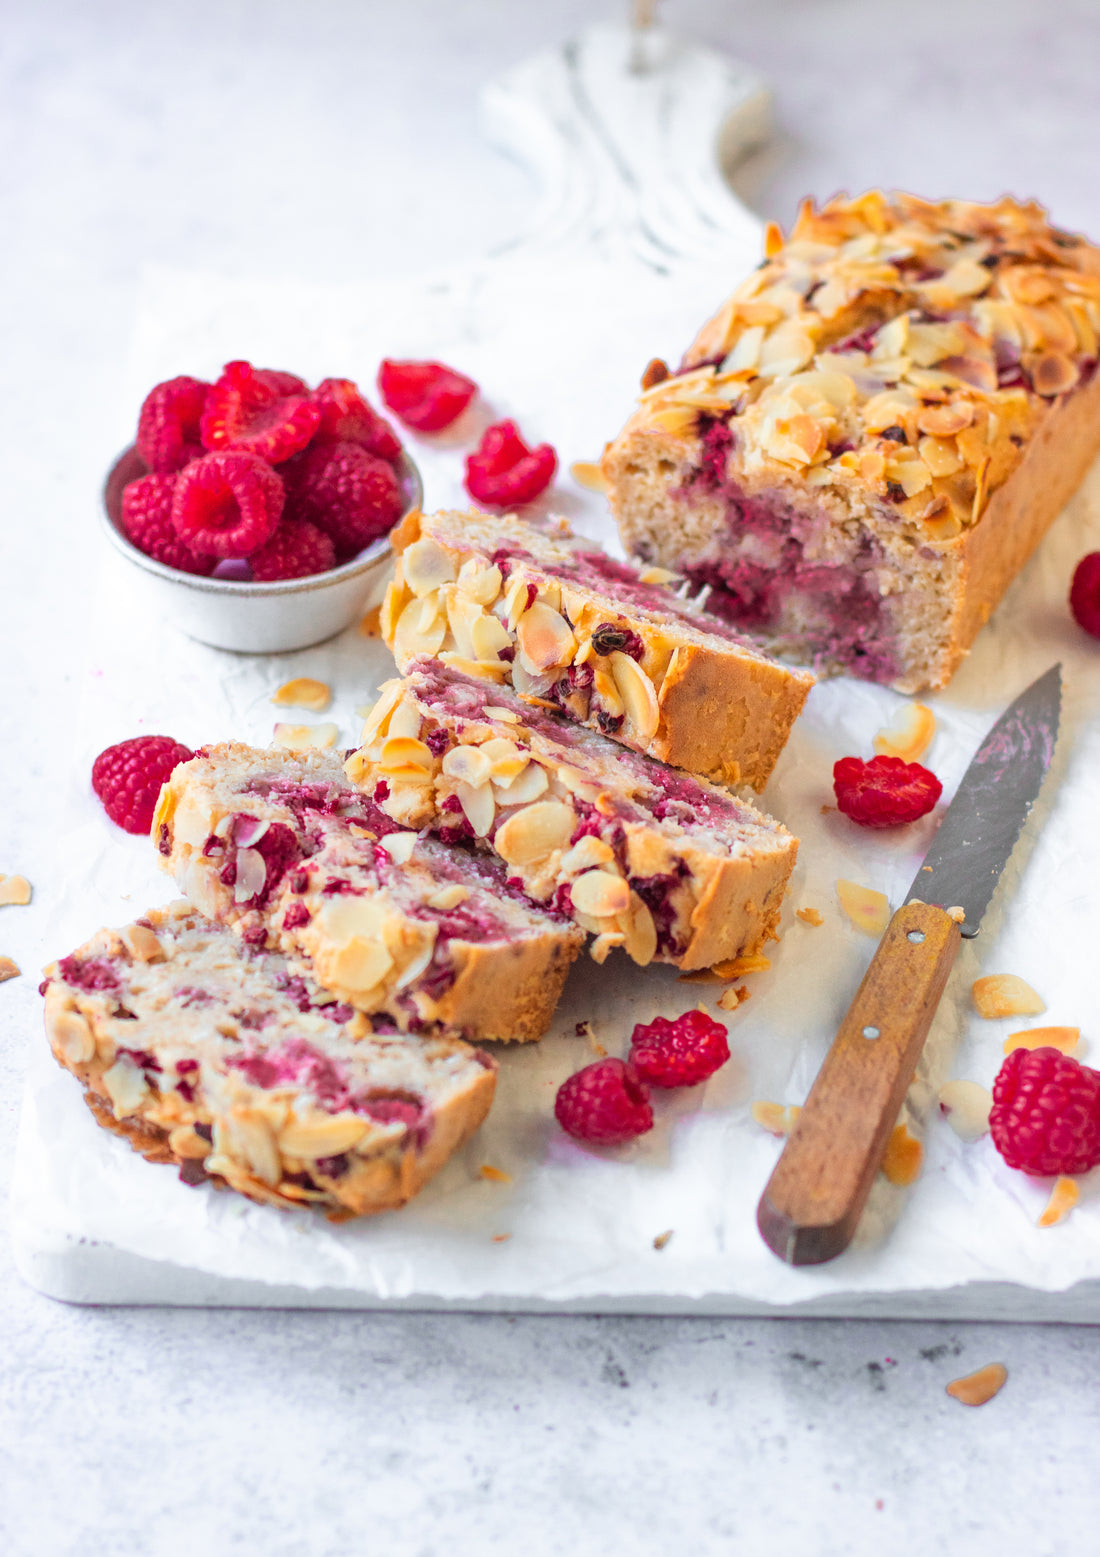 The Fertility Kitchen: Raspberry and Almond Loaf